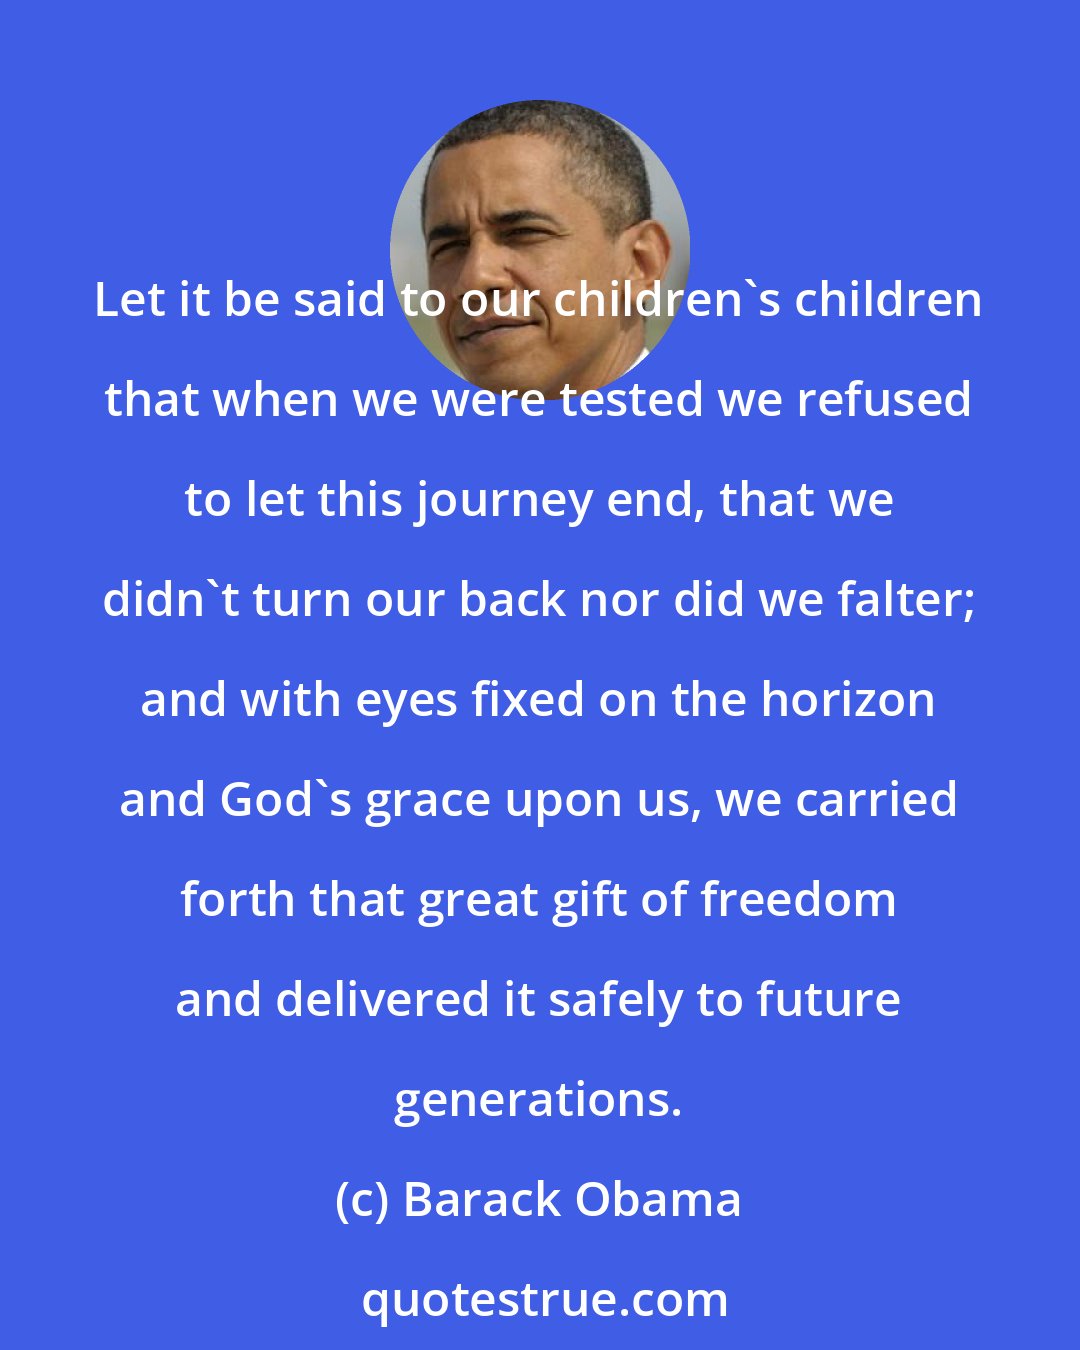 Barack Obama: Let it be said to our children's children that when we were tested we refused to let this journey end, that we didn't turn our back nor did we falter; and with eyes fixed on the horizon and God's grace upon us, we carried forth that great gift of freedom and delivered it safely to future generations.